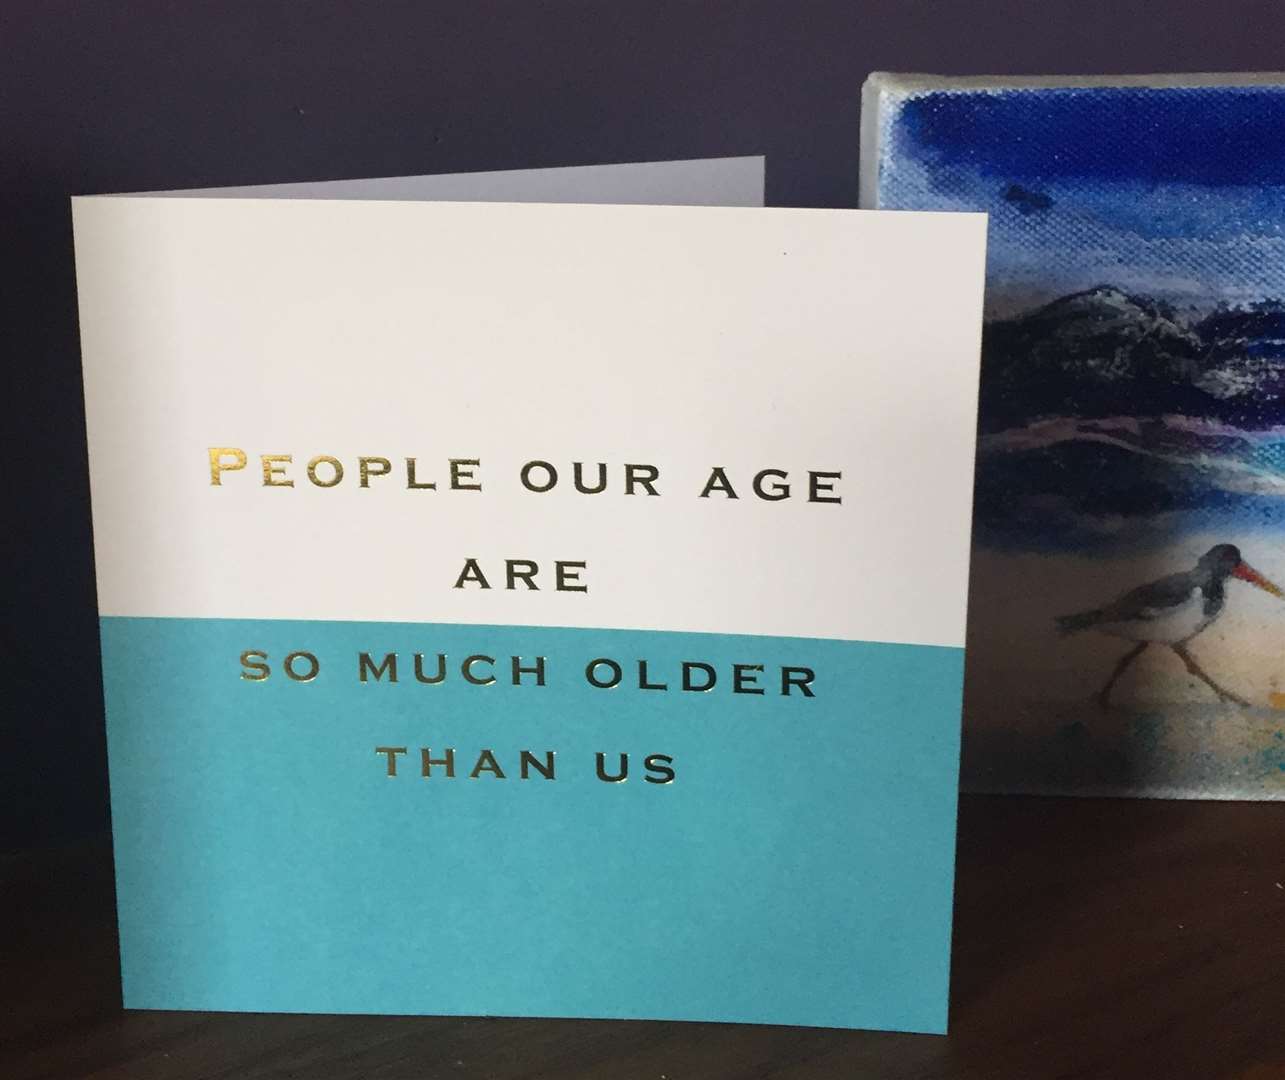 'People our age are so much older than us' one birthday card said.